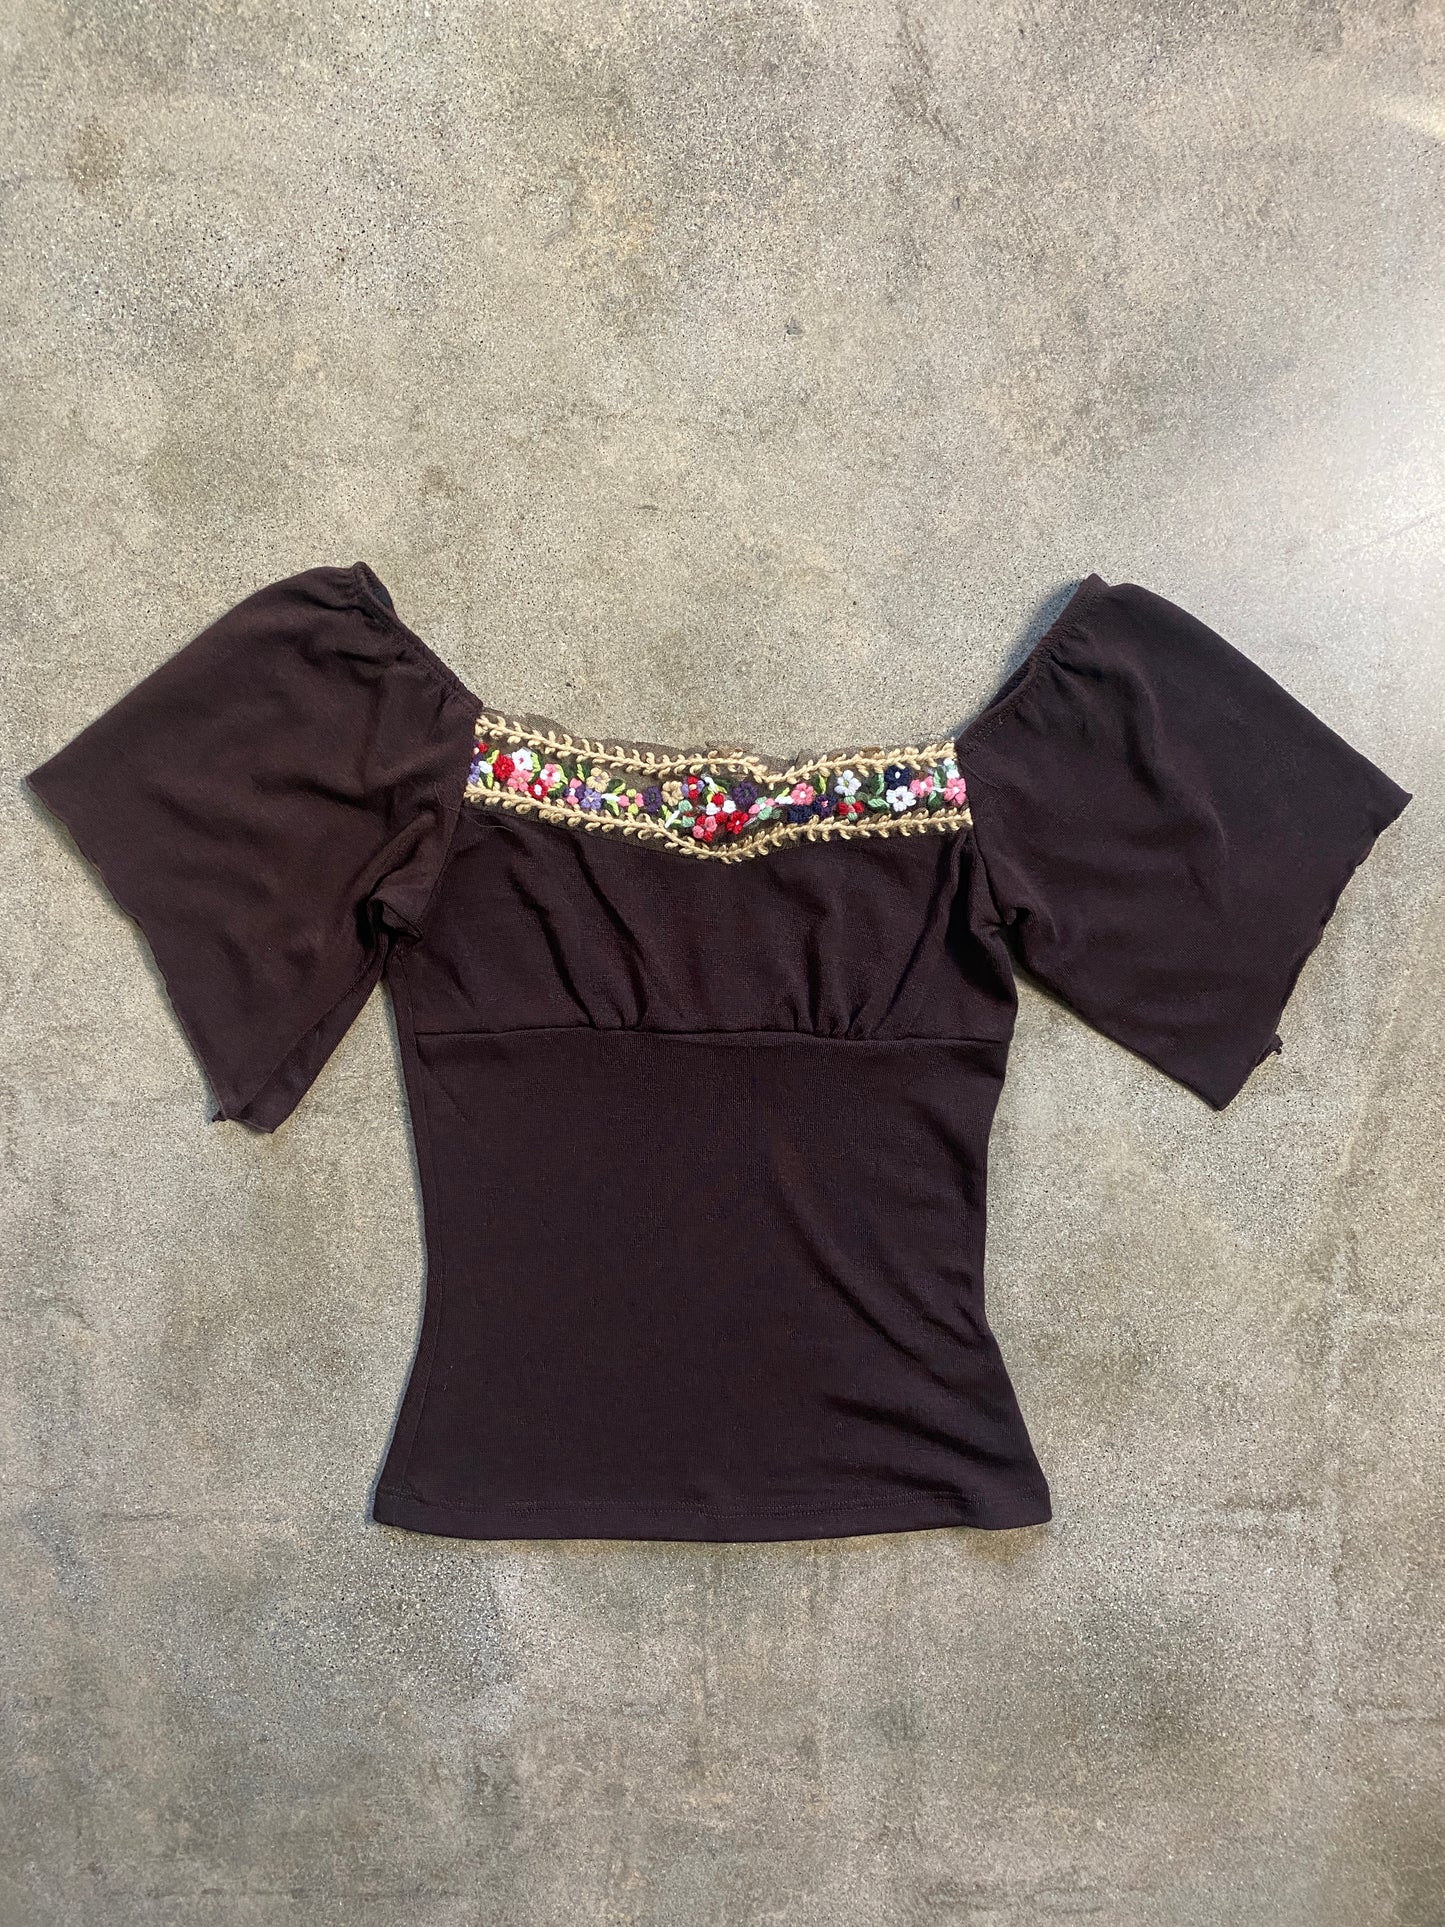 00's Deadstock Chocolate Brown Fairy Grunge Top